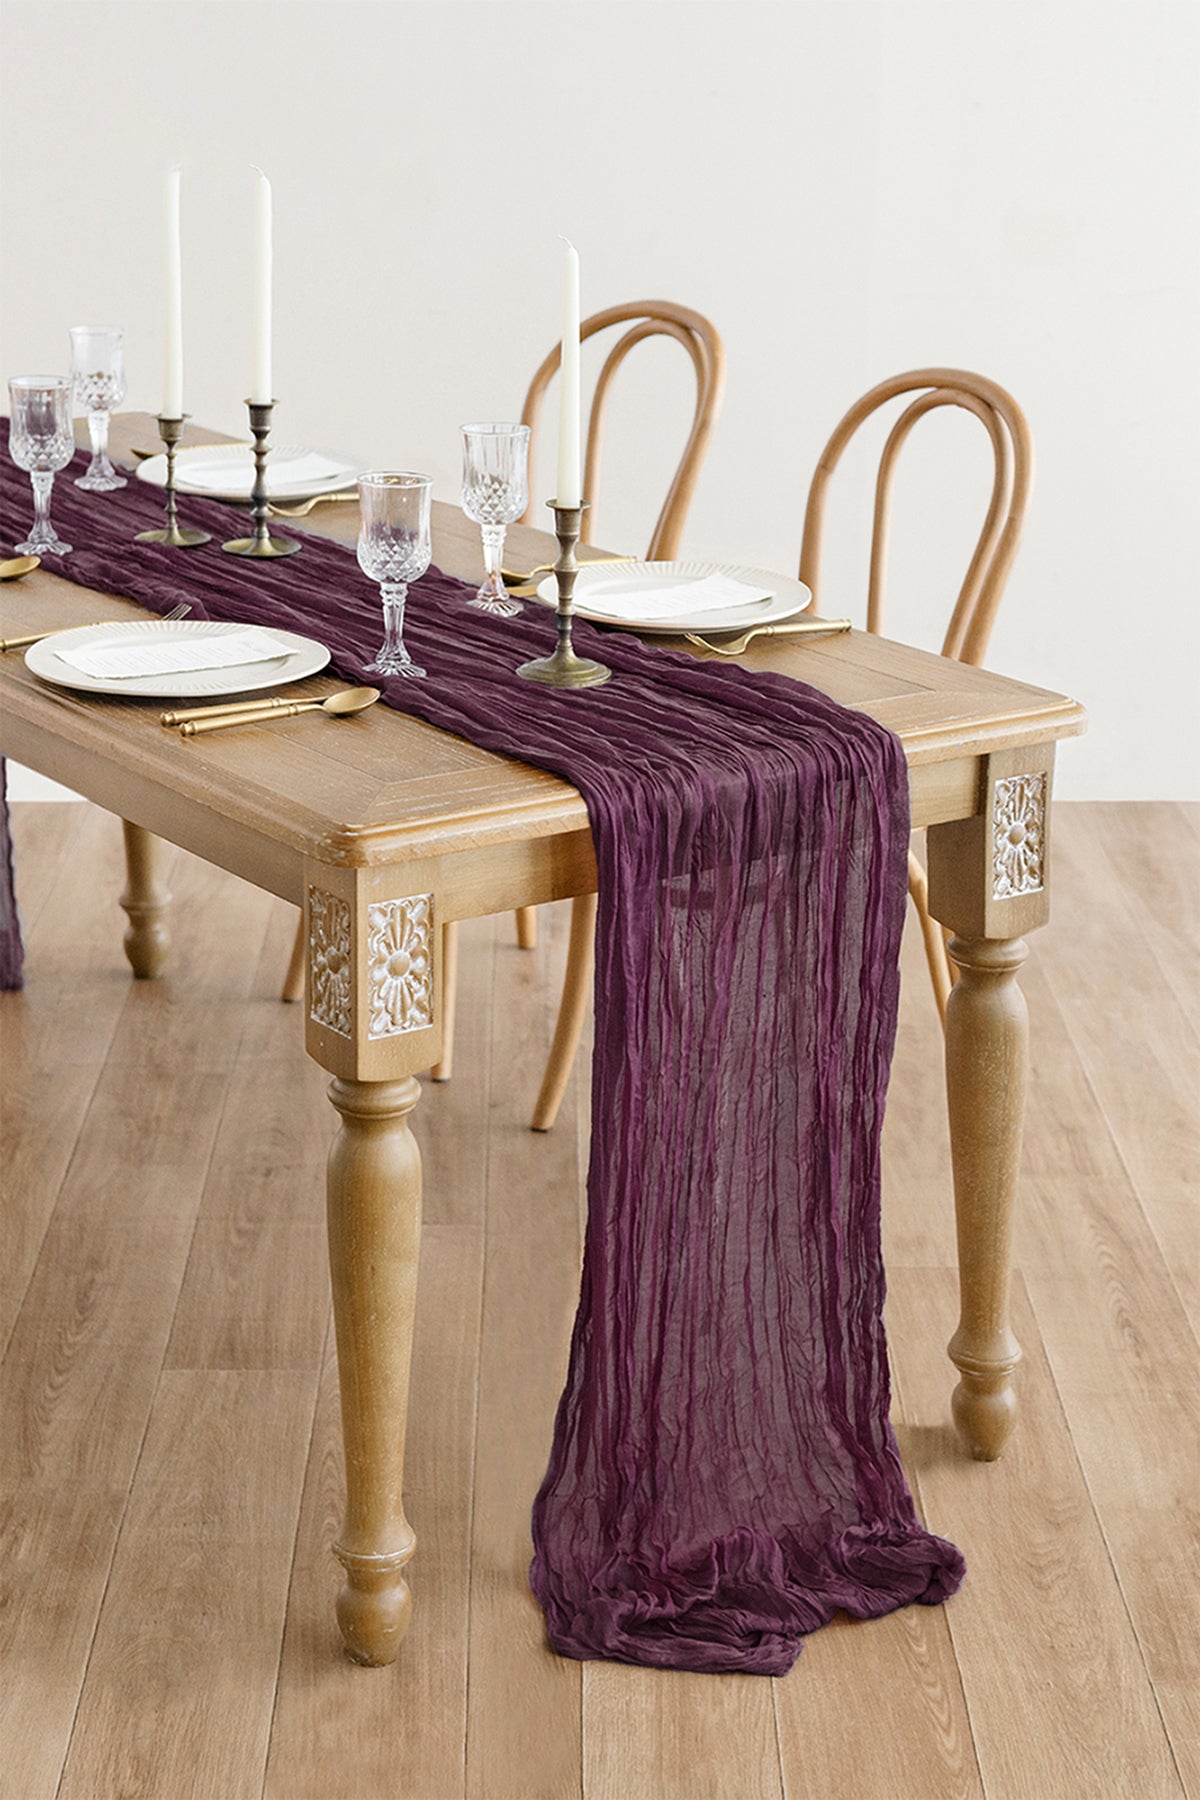 Rustic Gauze Cheesecloth Table Runner 35" w x 10ft/14ft - 16 colors